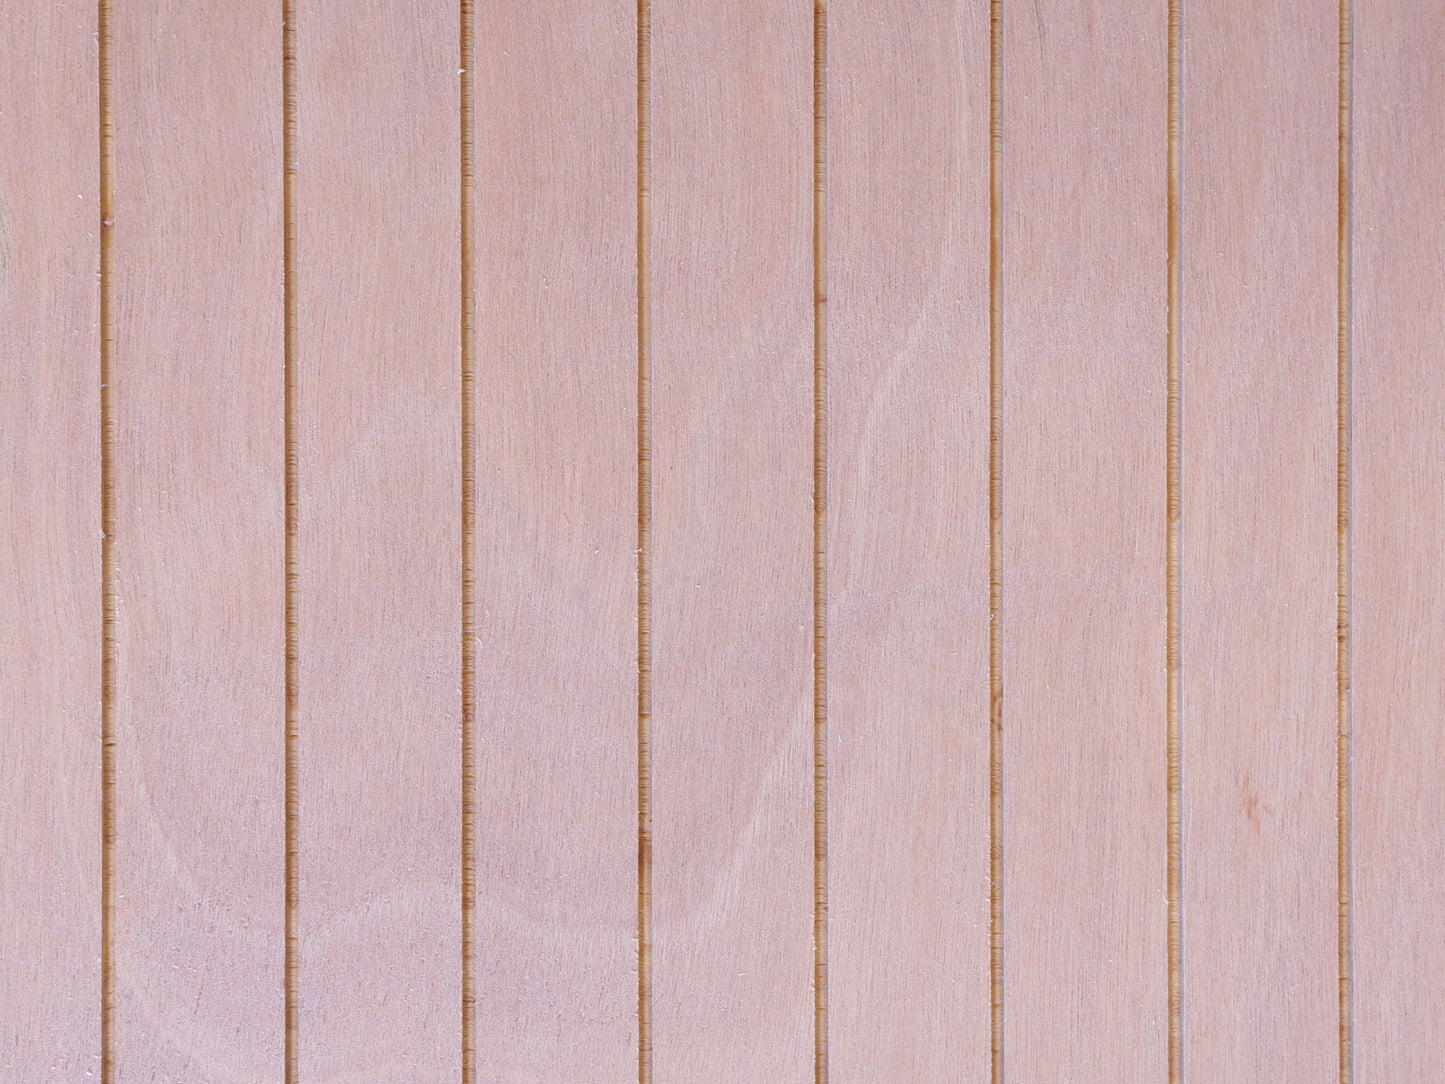 Close up of Thinline patterned plywood consisting of a 1/8” grooves, 1⅝” on center, commonly used as siding and paneling on Eichler homes and other mid-century modern design